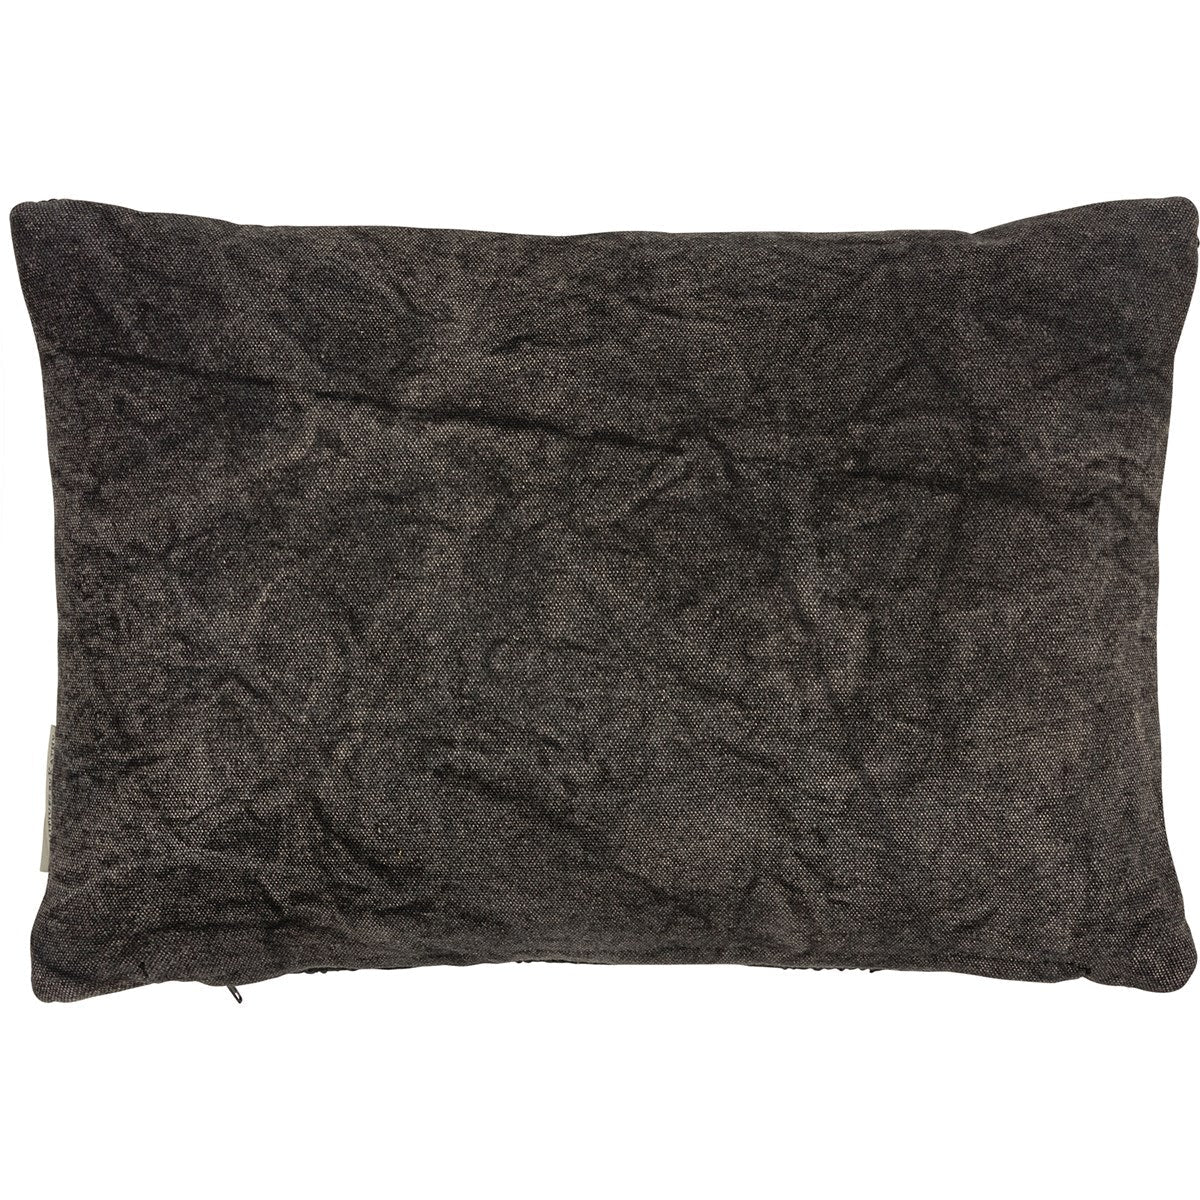 Black on Black Boo Pillow - Favorite Little Things Co